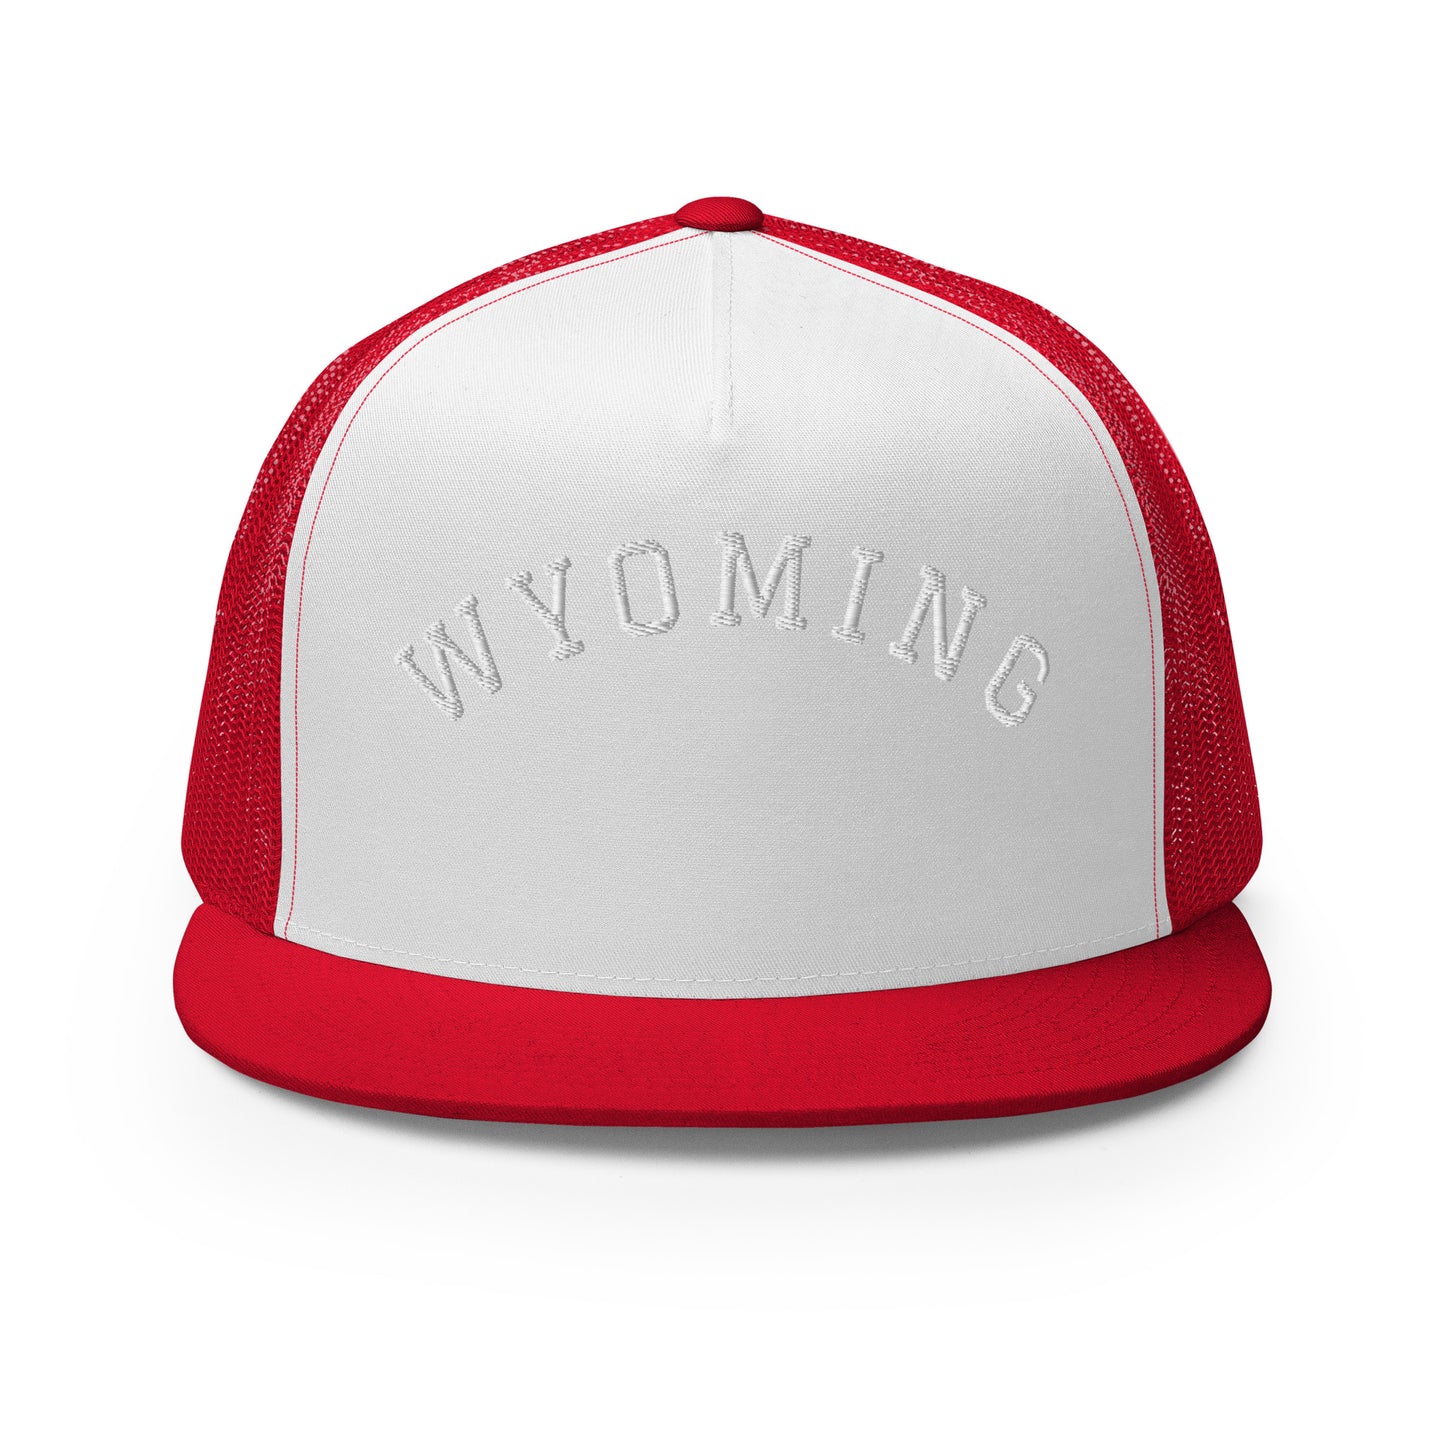 Wyoming Arch High 5 Panel A-Frame Snapback Trucker Hat